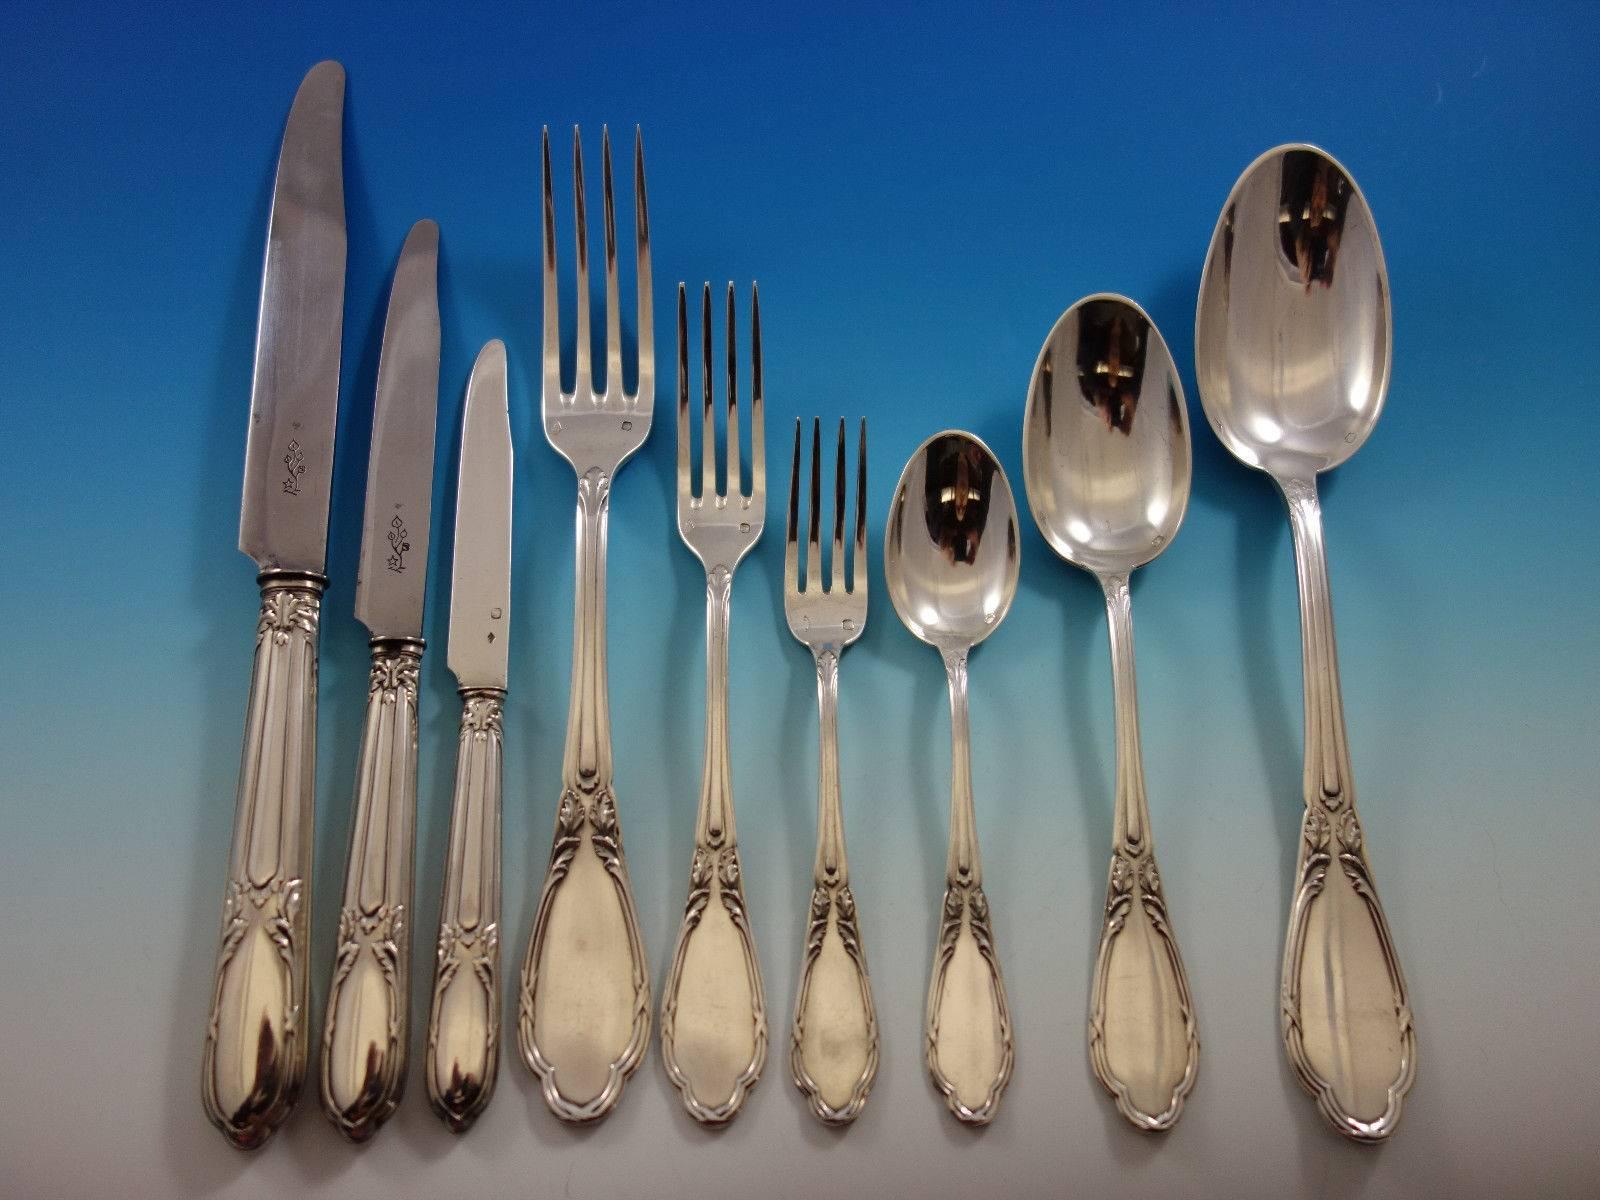 Henin and Cie French 950 sterling silver set with beautiful leaf design - 112 pieces. This set includes: 

12 dinner knives, 9 3/4